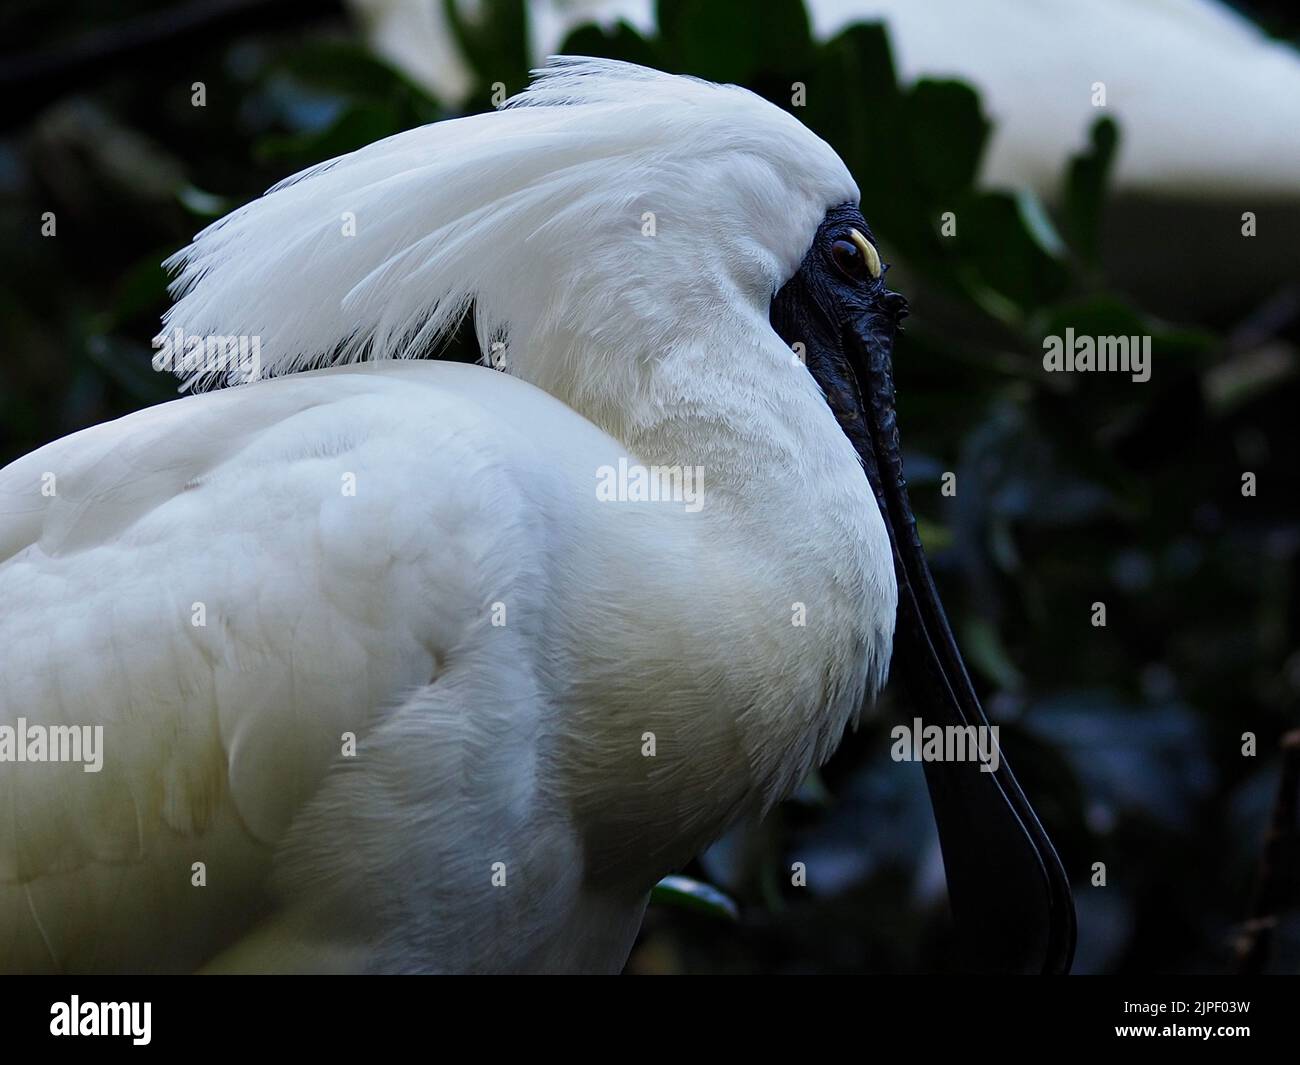 Phenomenal awesome male Royal Spoonbill with a flawless white crest. Stock Photo